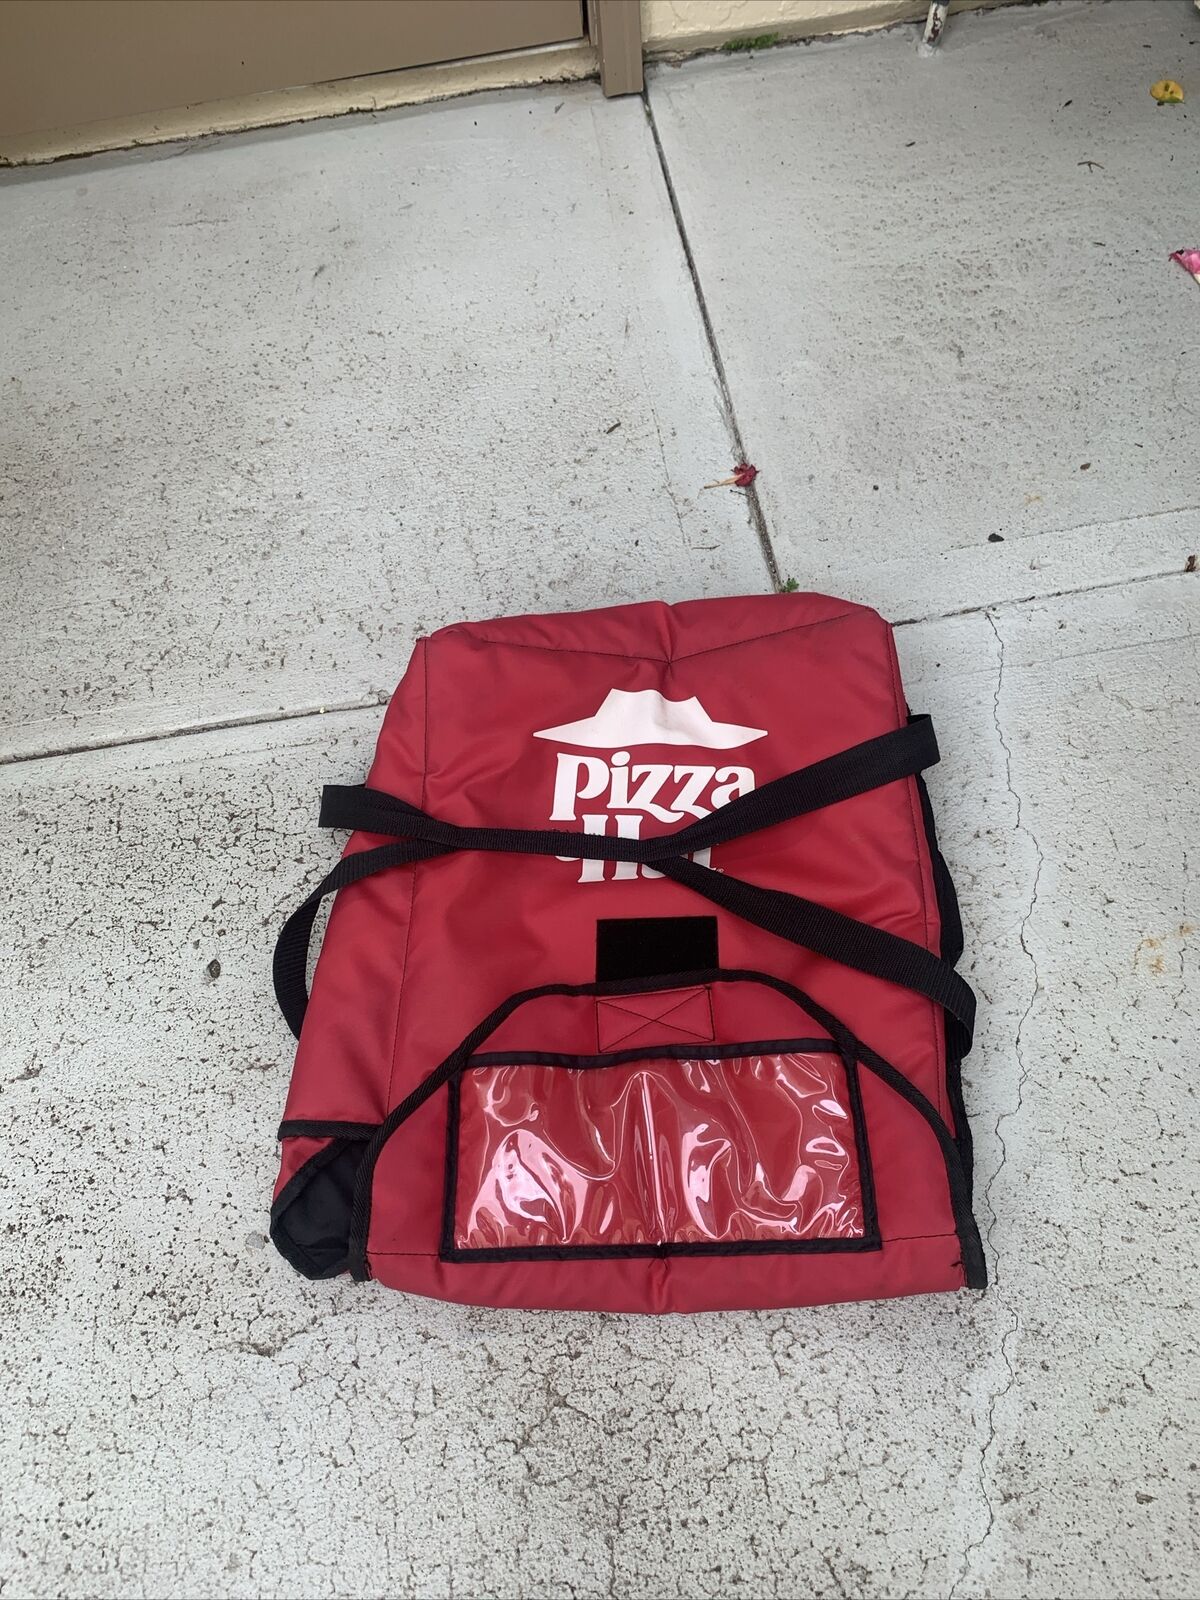 Pizza Hut Hot From The Hut Insulated Red Delivery Carry Bag